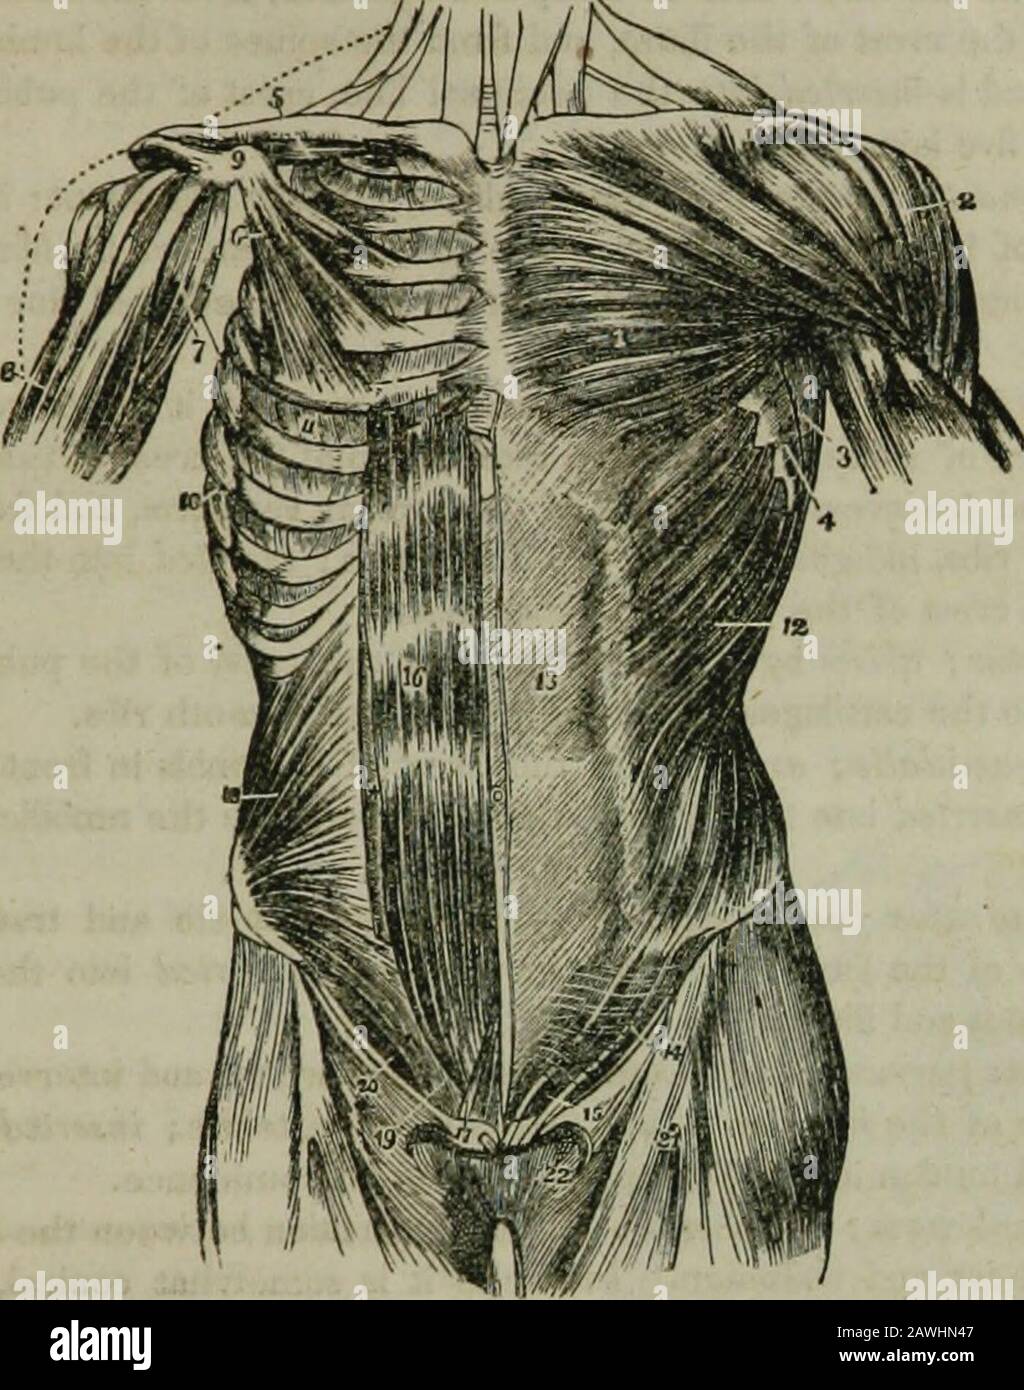 The hydropathic encyclopedia : a system of hydropathy and hygiene in eight parts ..designed as a guide to families and students, and a text-book for physicians . ament is that part of the aponeu-rosis inserted into the pectineal line. The linea alba is a white tendi-nous slip extending along the middle of the abdomen from the ensiformcartilage to the os pubis. Externally, on each side of it, are twocurved lines, extending from the sides of the chest to the pubis, calledthe linea semilunares; these lines are connected with the linea albaby several cross lines, usually three or four in number, c Stock Photo